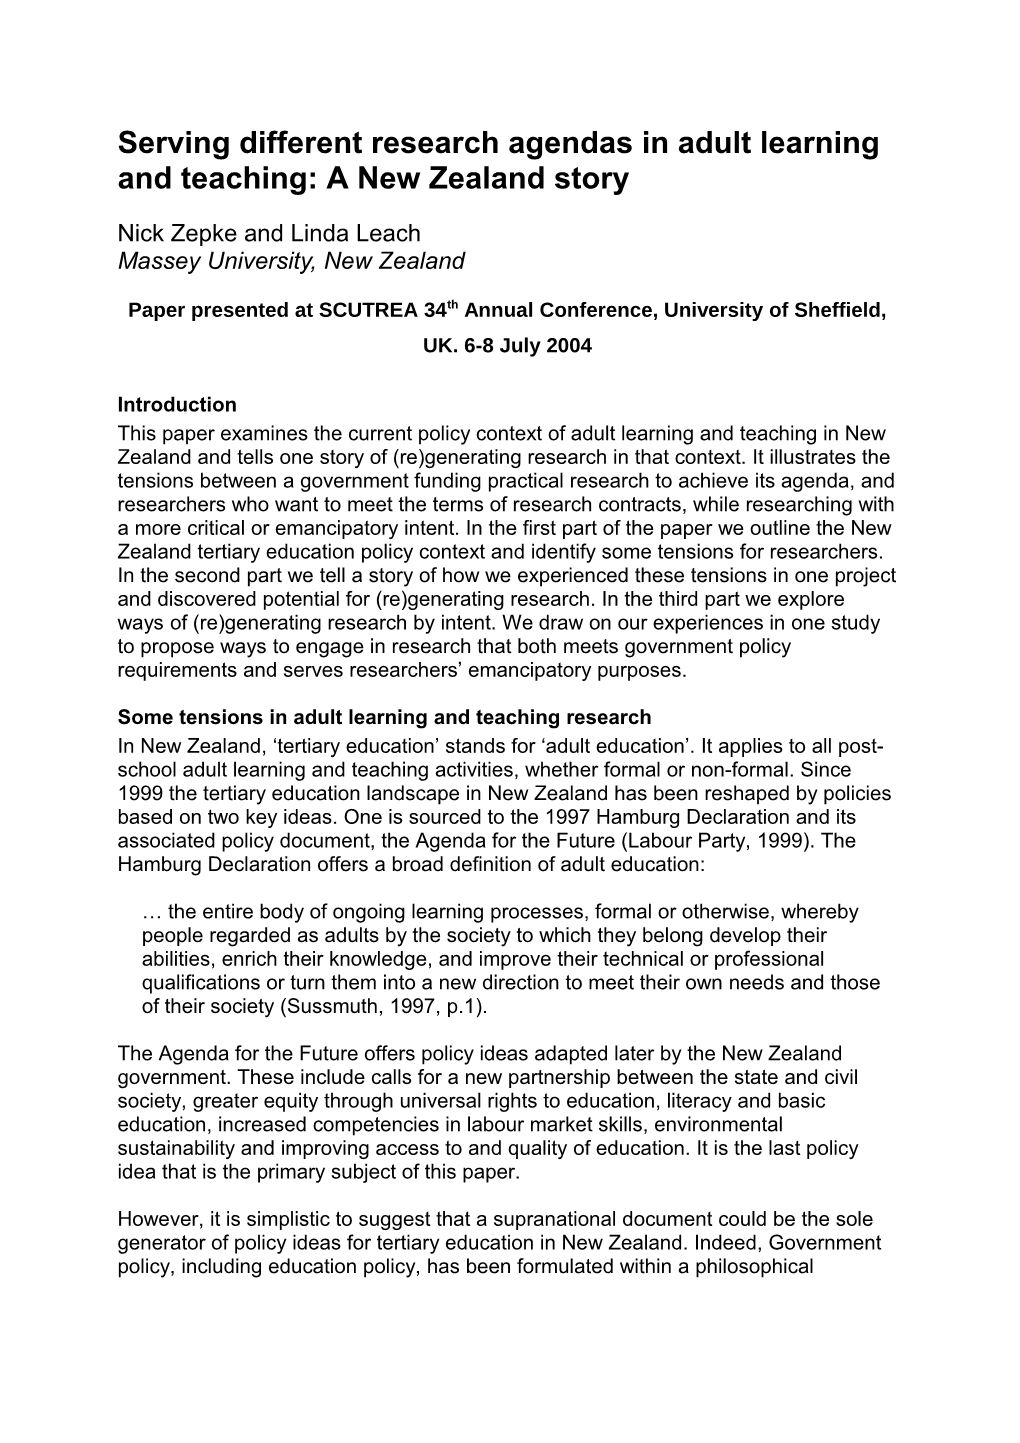 Serving Different Research Agendas in Adult Learning and Teaching: a New Zealand Story